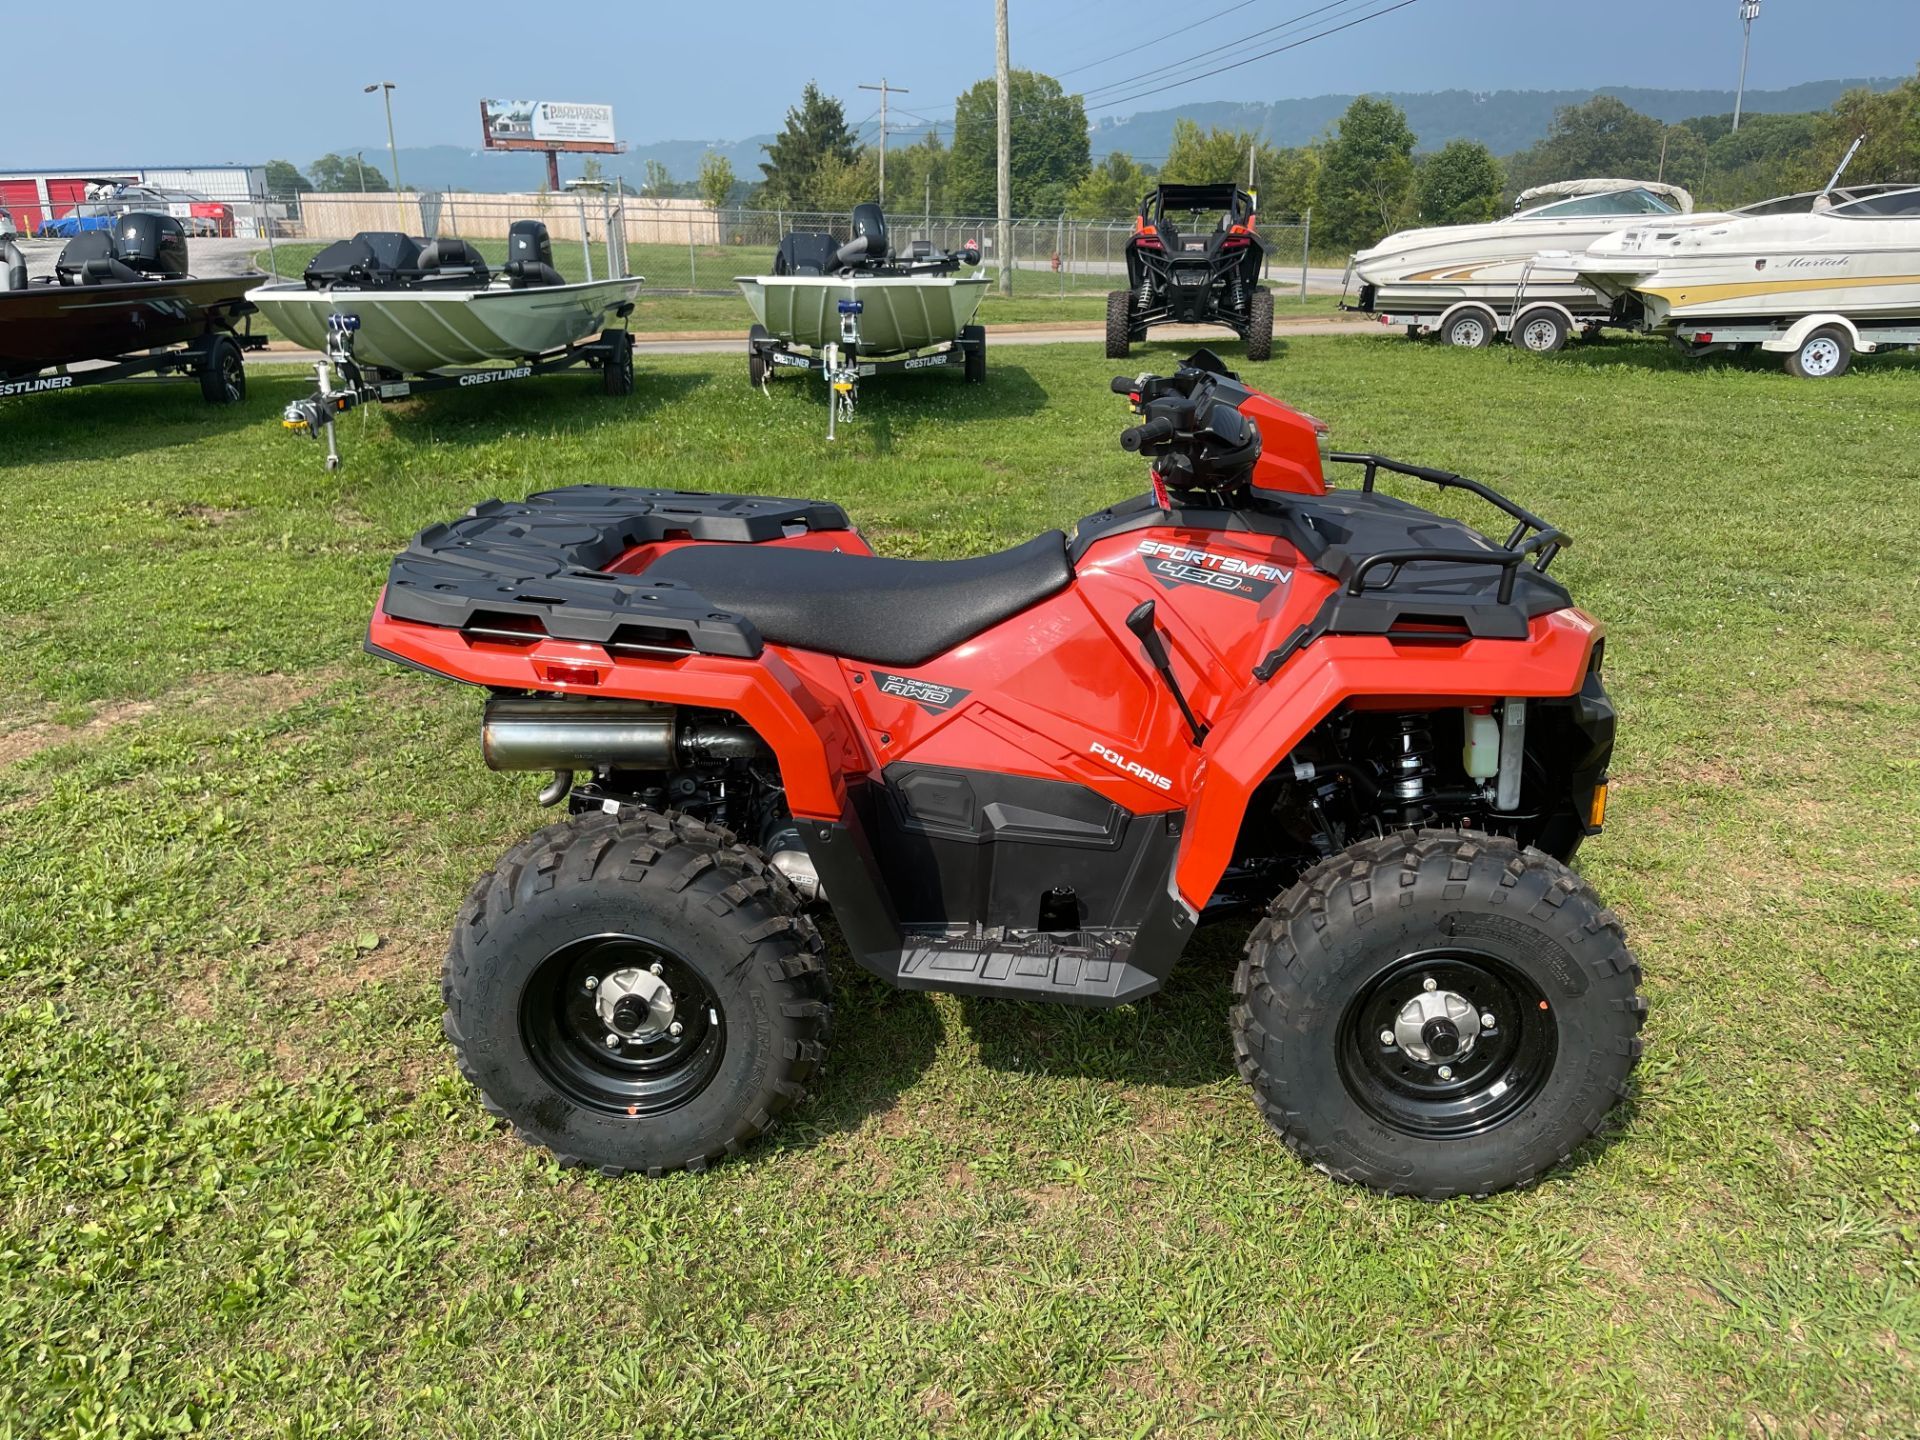 2024 Polaris Sportsman 450 H.O. Utility in Ooltewah, Tennessee - Photo 6